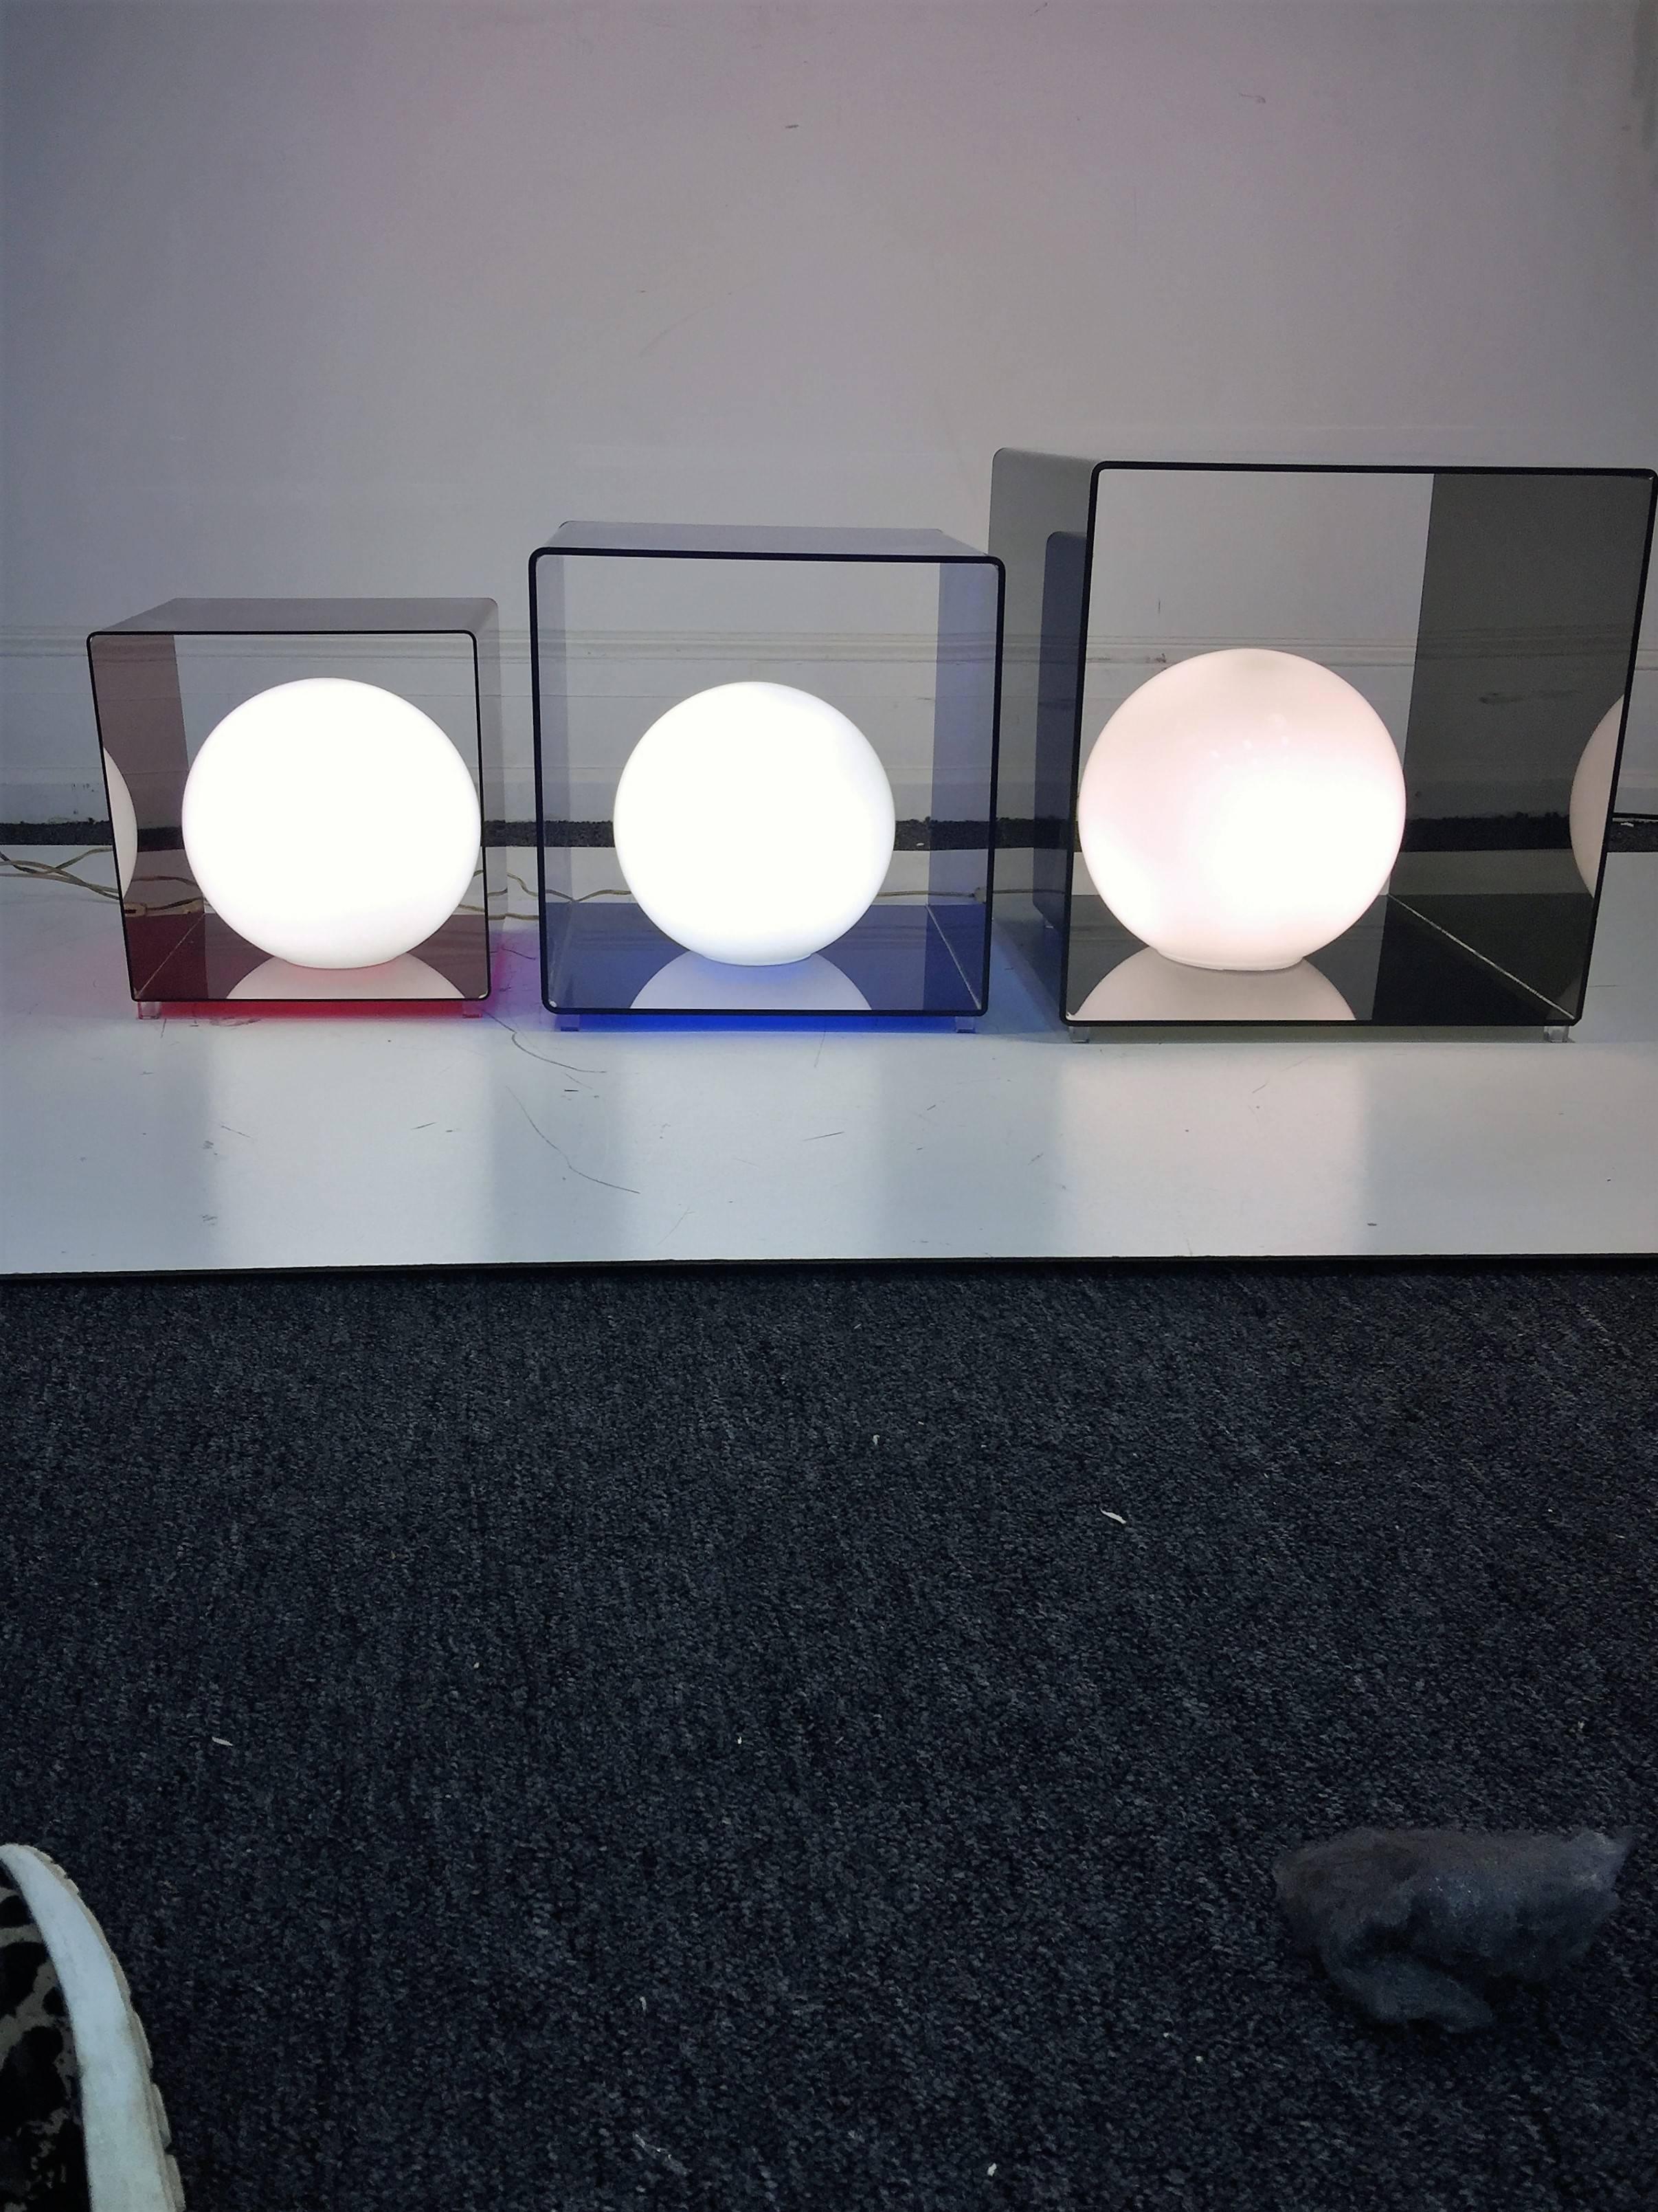 Cool trio of 1970s Lucite cube lamps with white glass ball shades. These can be used in many design configurations that give them great versatility for your interior. Large smoky grey cube - 18 1/2